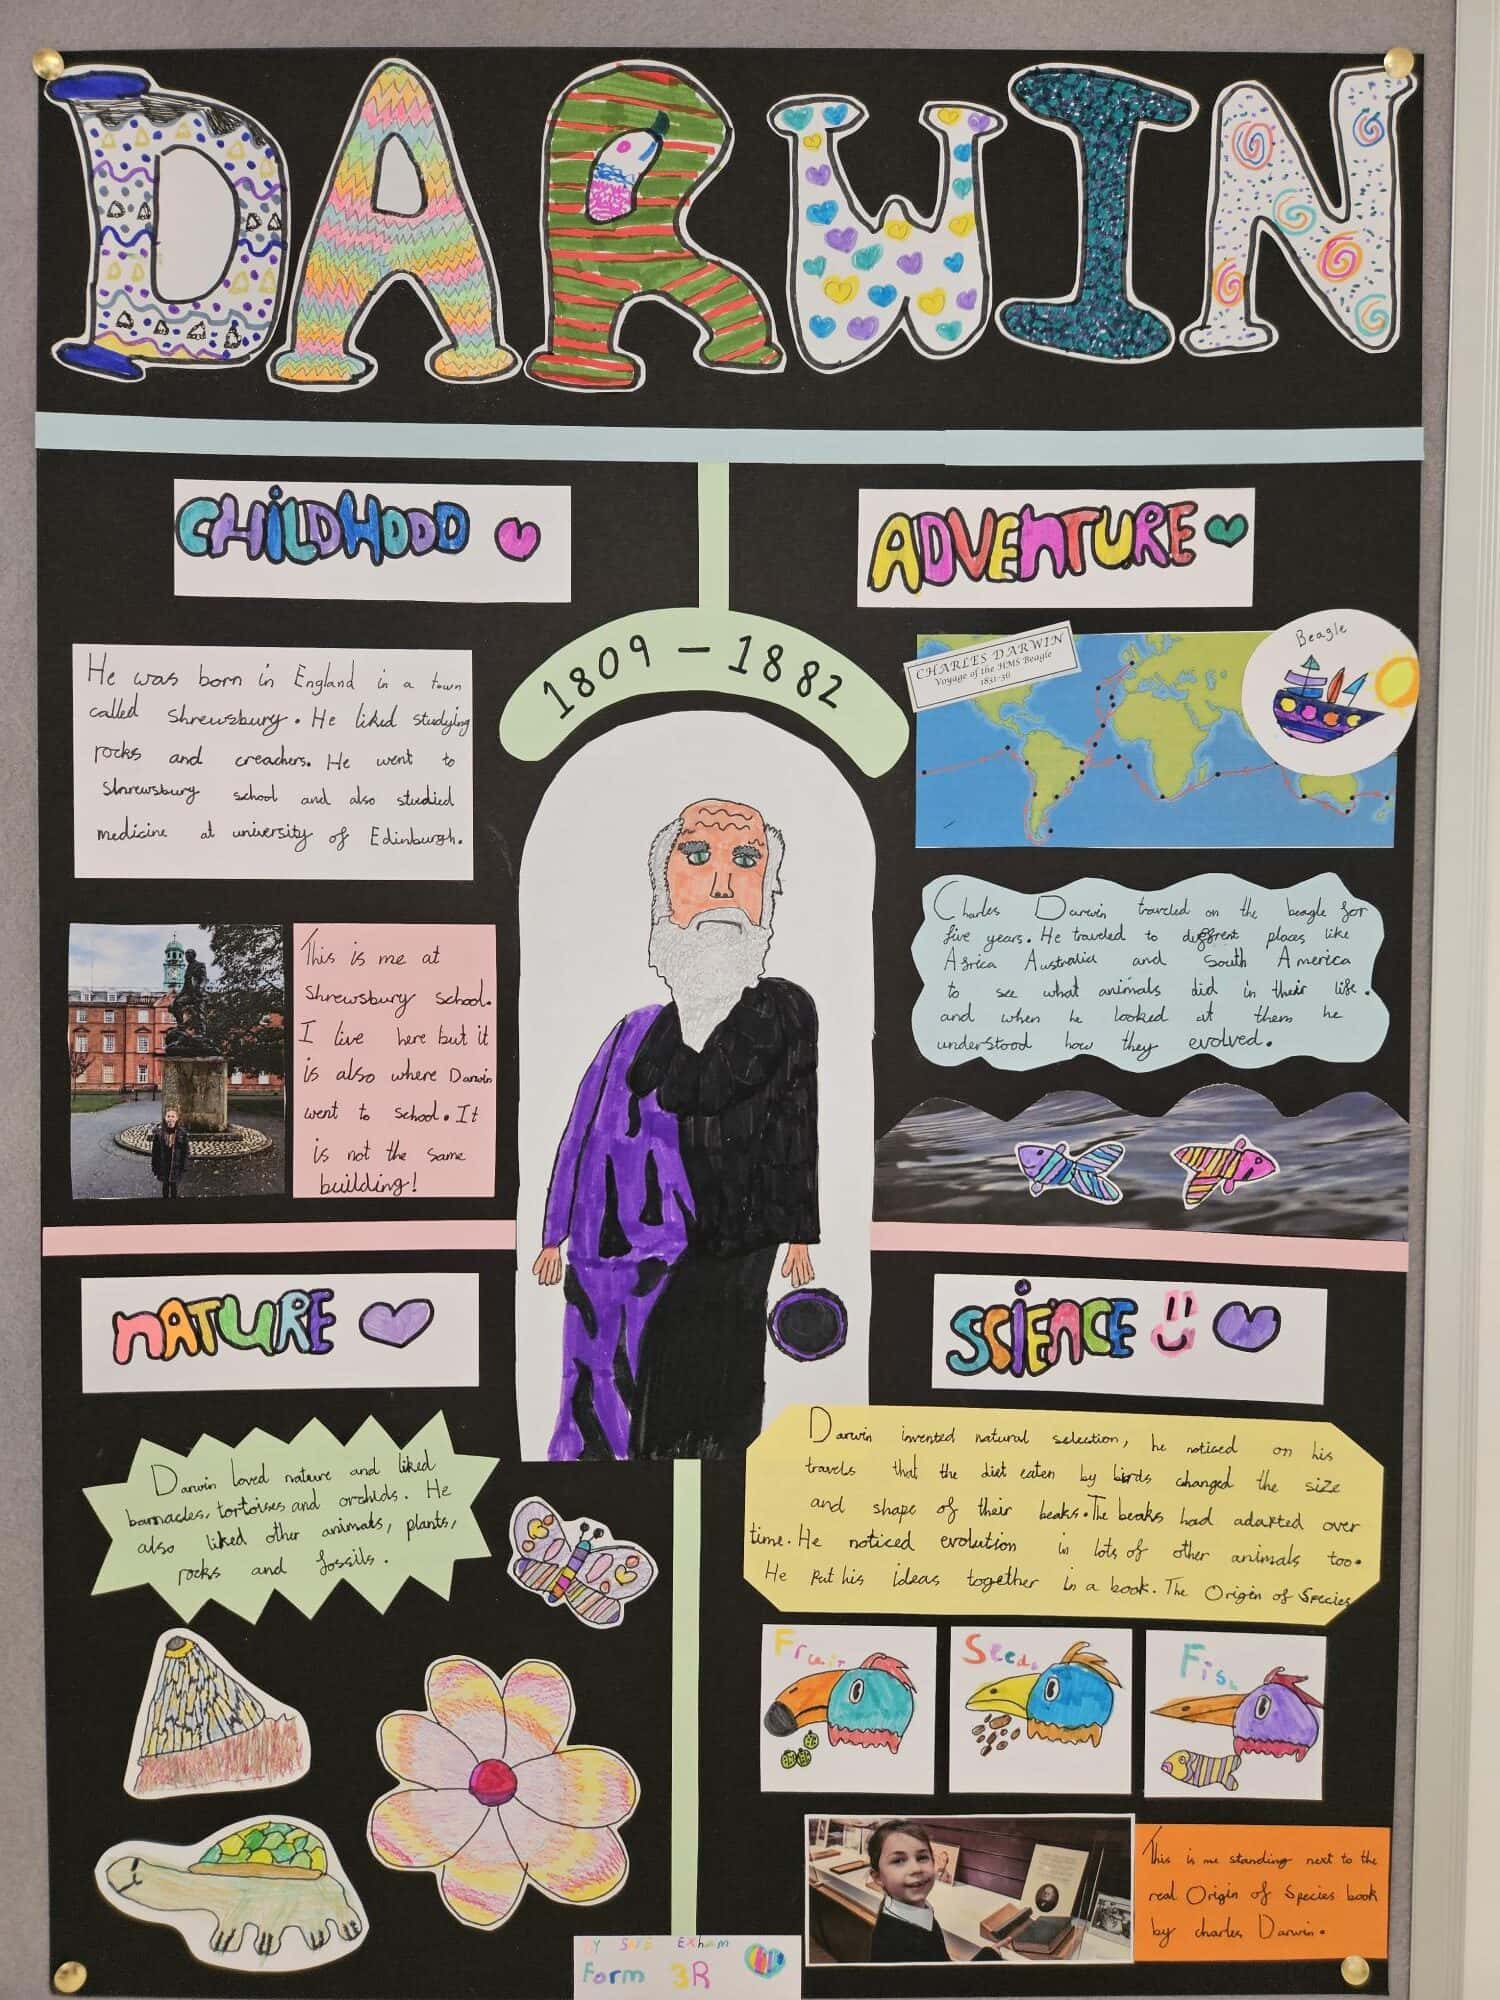 A colourful poster with facts about Charles Darwin